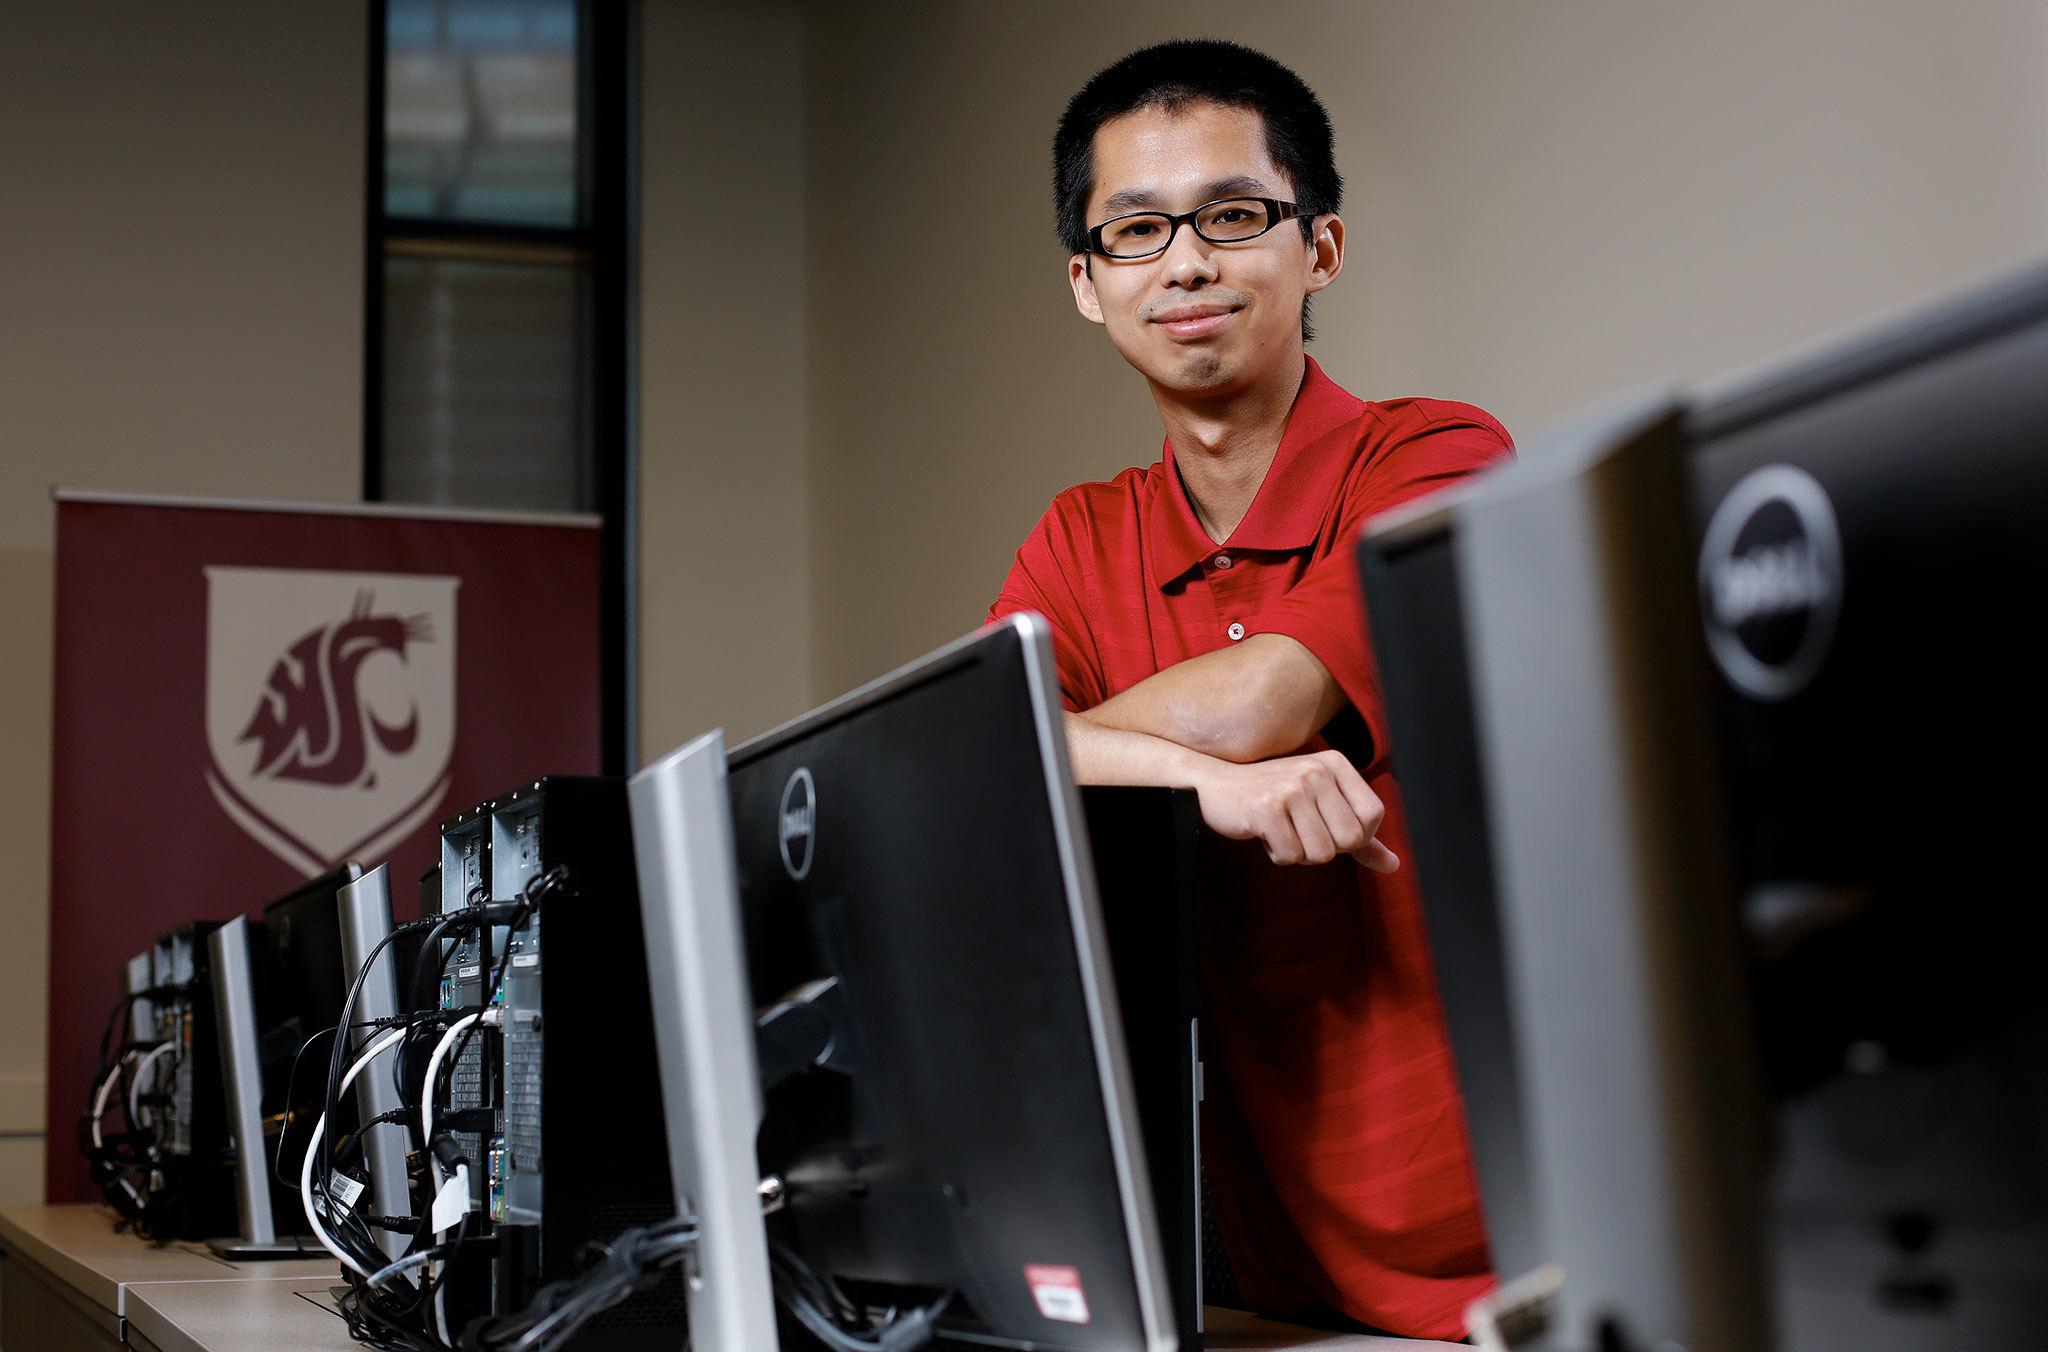 Bolong Zeng will serve as clinical assistant professor and program coordinator for the new software engineering program at Washington State University in Everett. (Andy Bronson / The Herald)